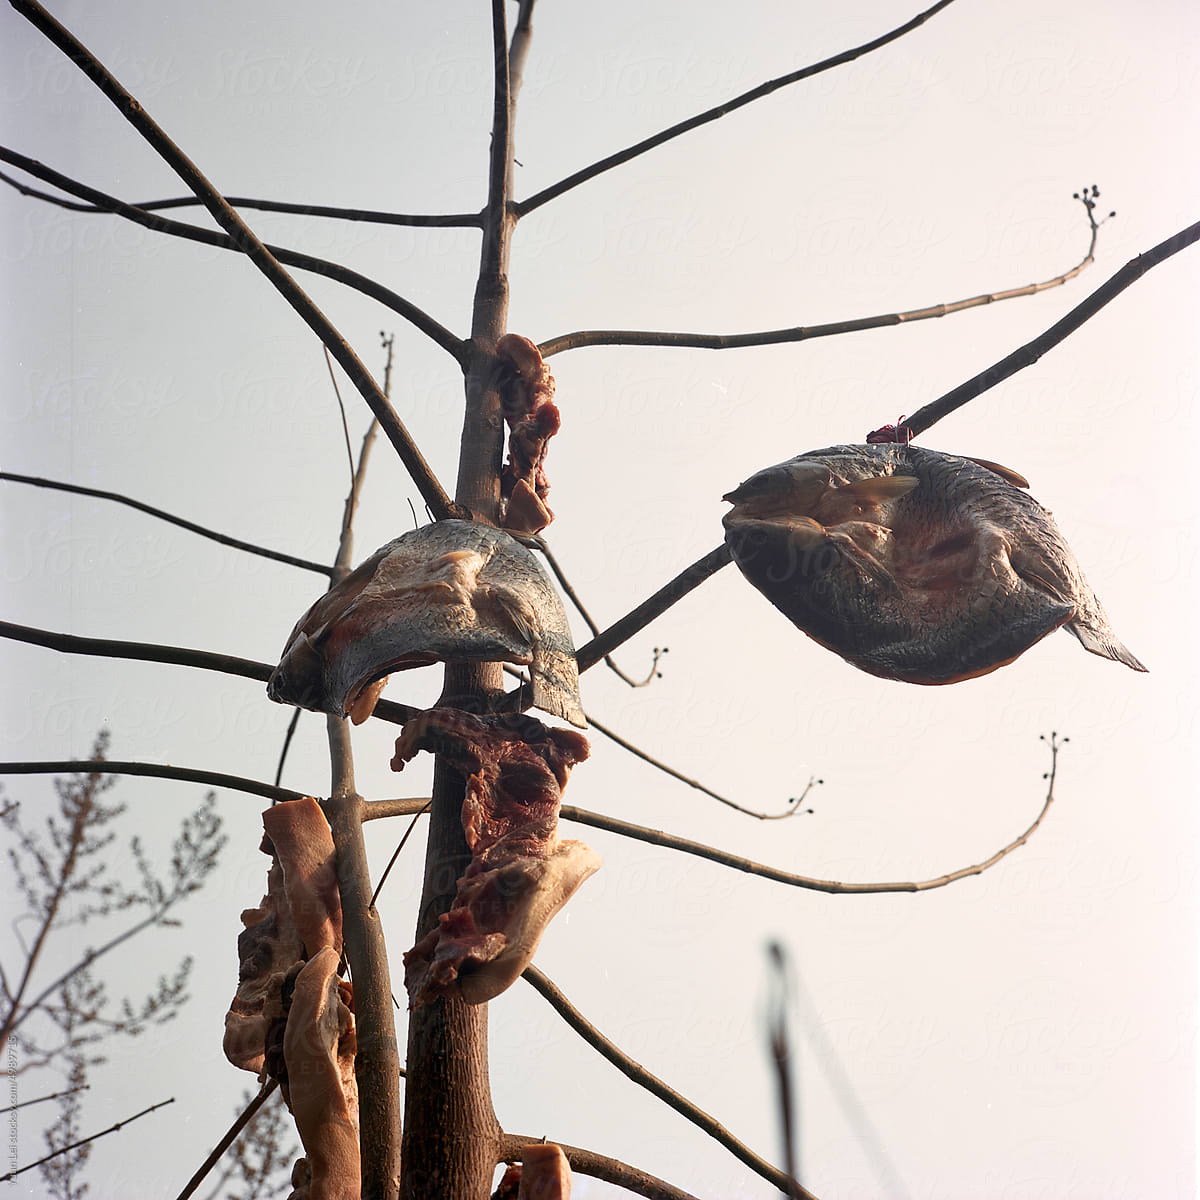 Smoked fish and bacon hanging on the branches